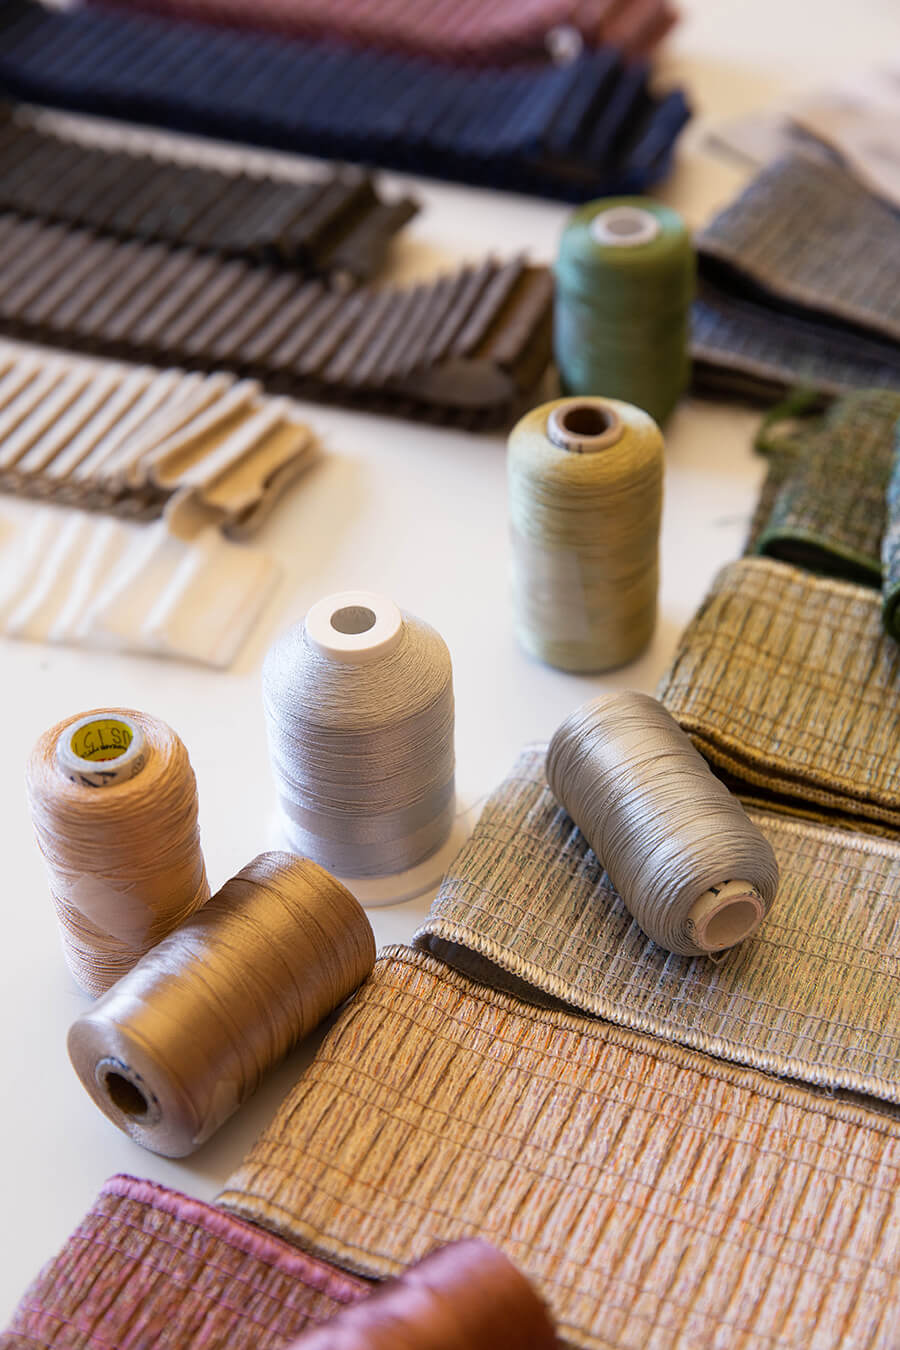 Behind-the-scenes during the development of the Merengue Pleated Metallic Border by Lori Weitzner for Samuel & Sons.